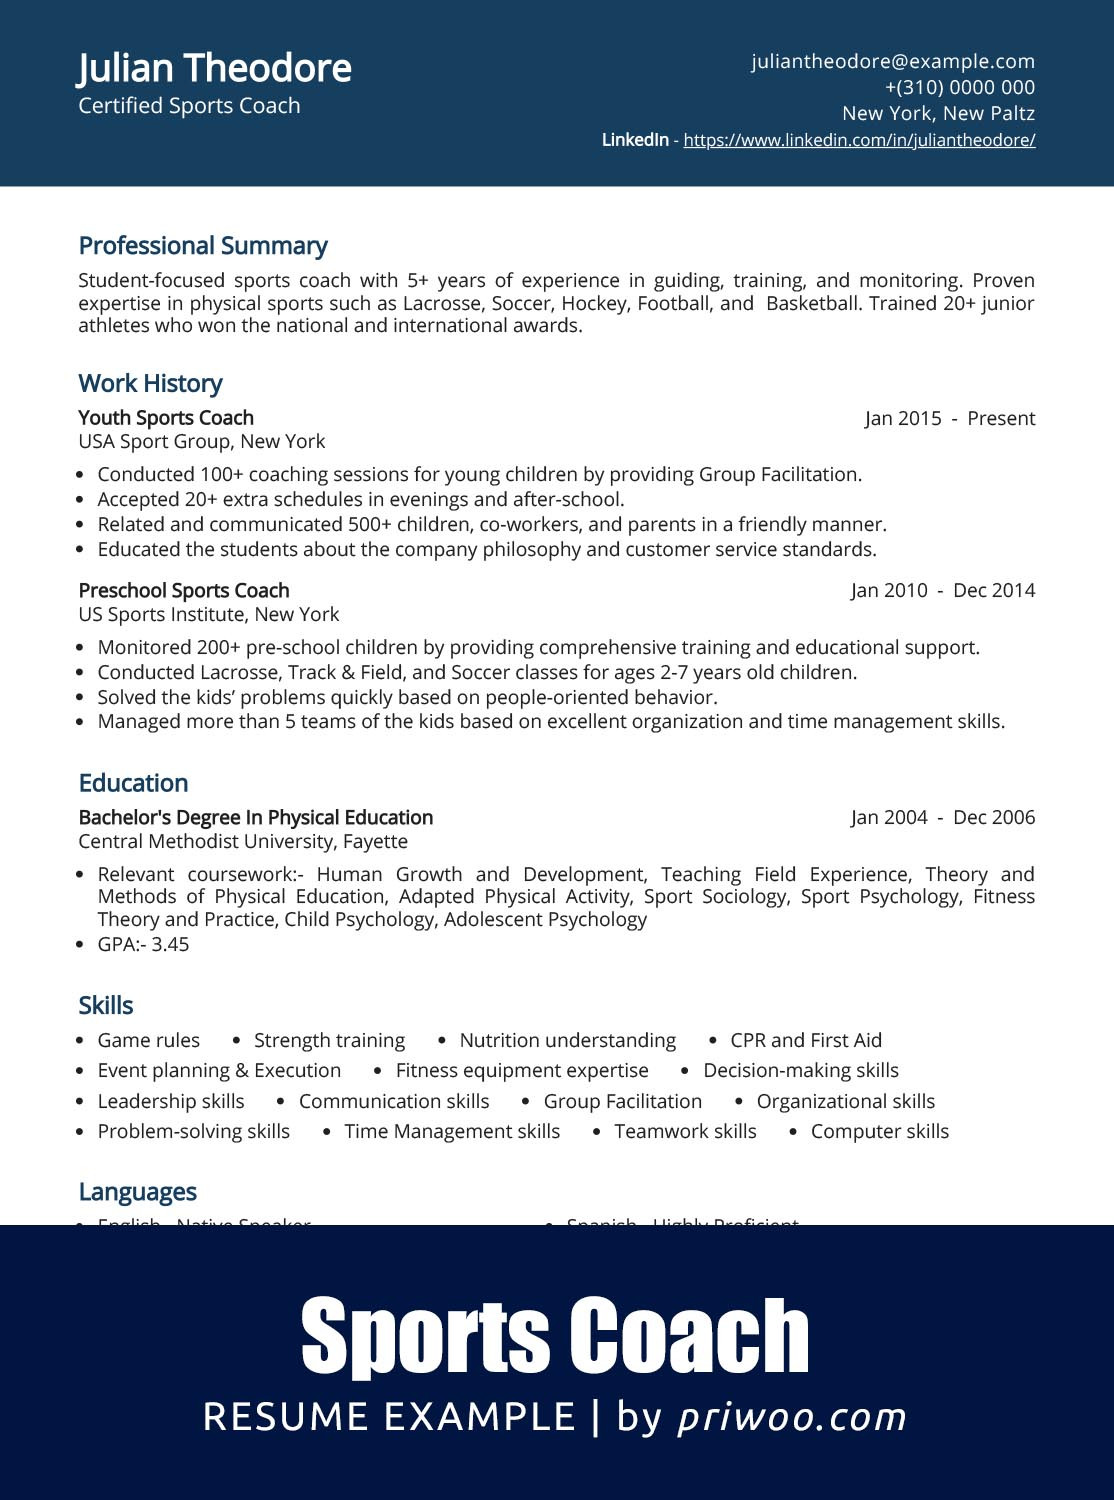 High School Football Coach Resume Sample Sports Coach Resume Example with Tips Priwoo